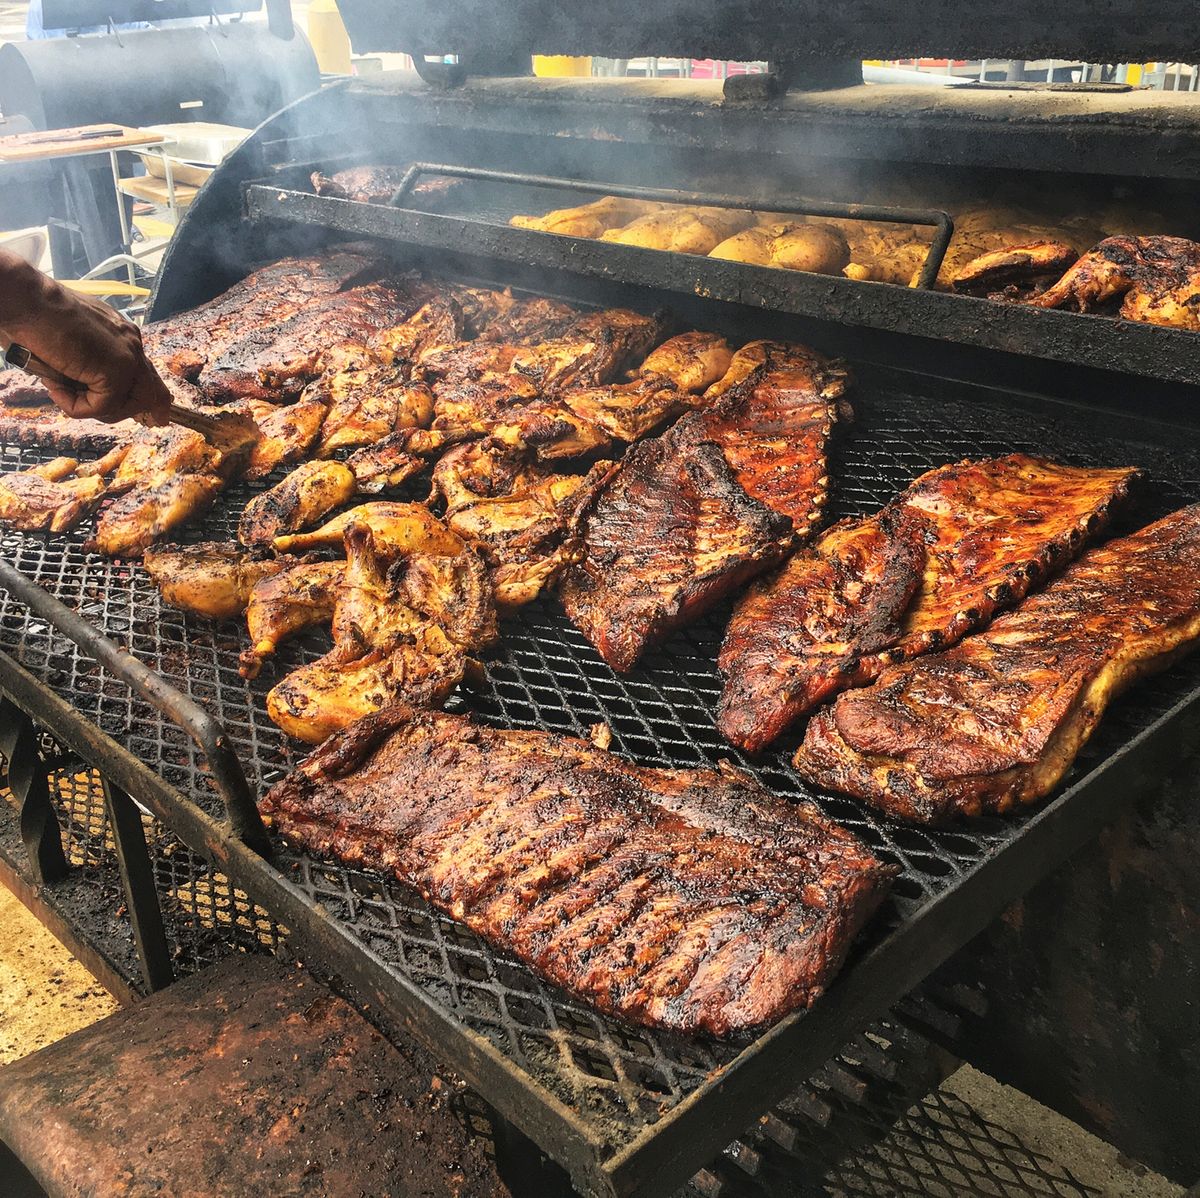 https://hips.hearstapps.com/hmg-prod/images/cooking-chicken-and-slabs-of-ribs-on-barbecue-grill-royalty-free-image-1625609727.jpg?crop=0.694xw:1.00xh;0.231xw,0&resize=1200:*